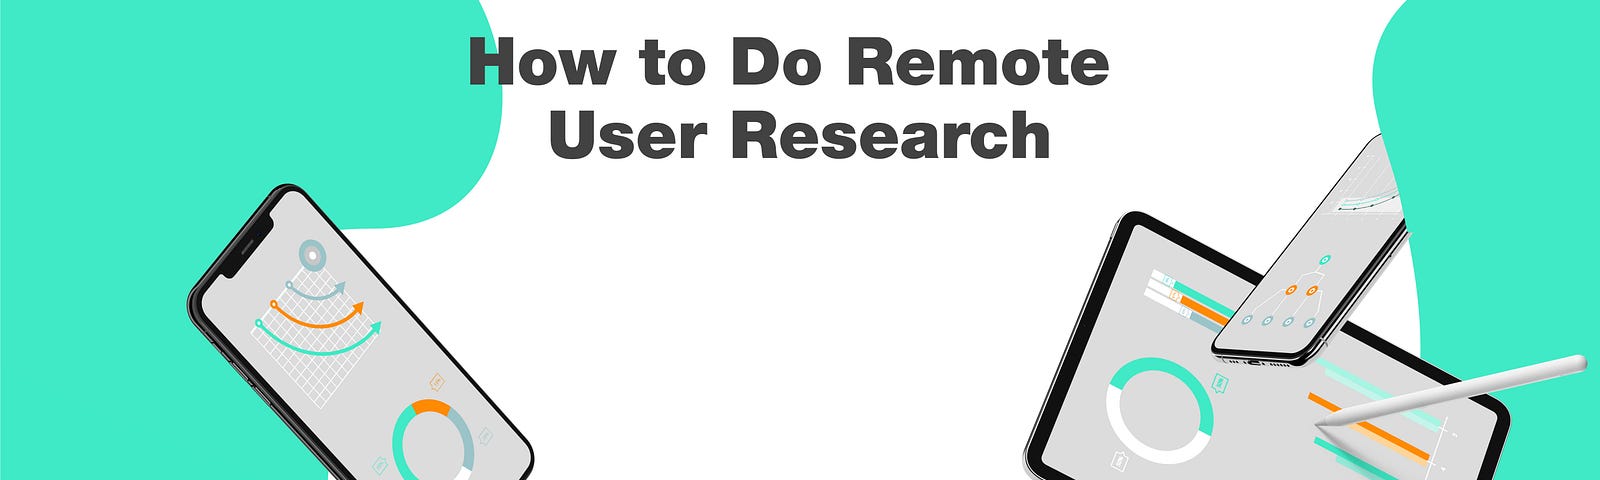 How to do remote user research